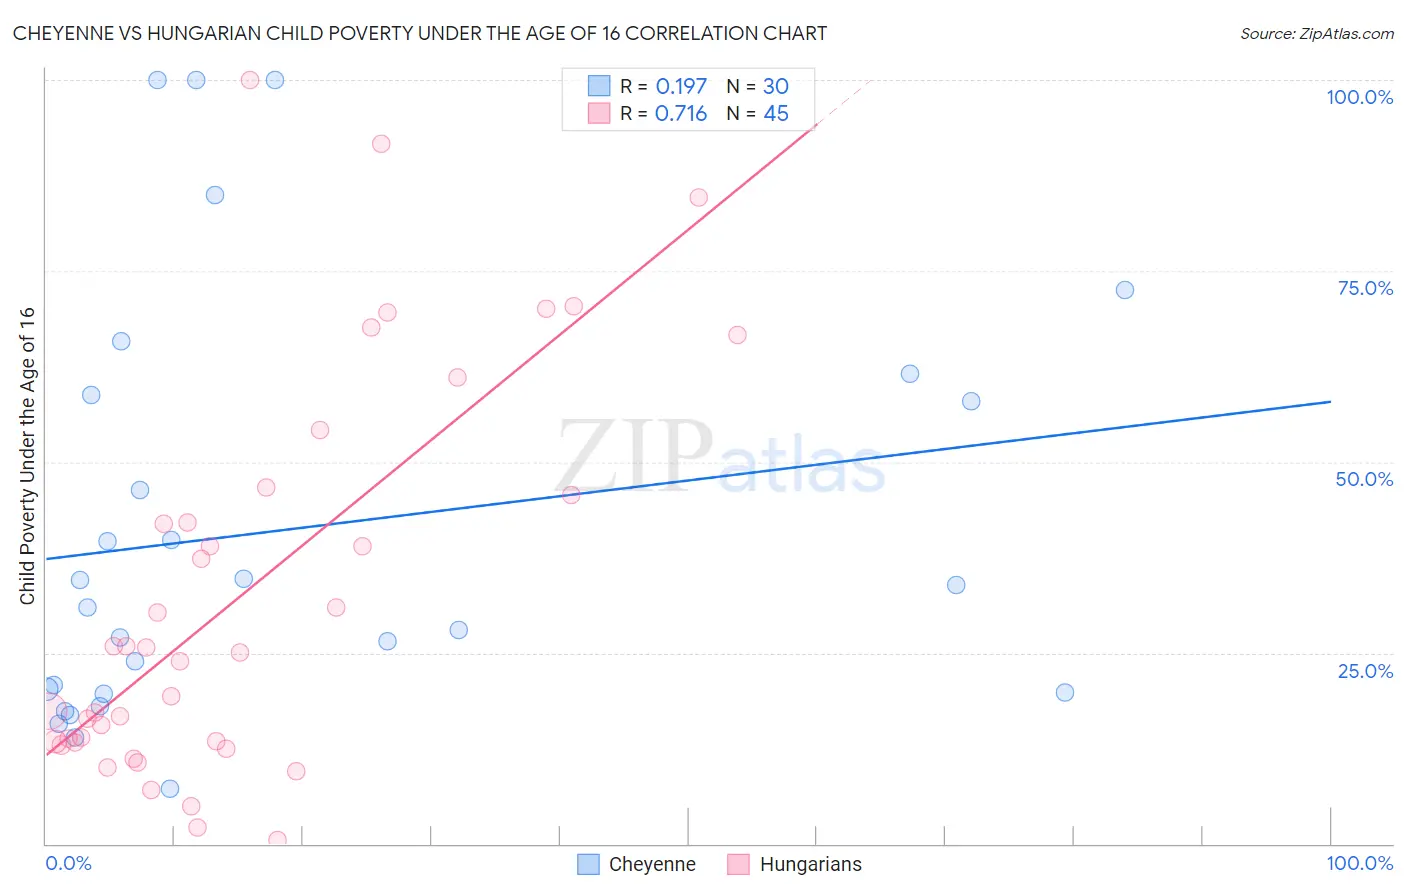 Cheyenne vs Hungarian Child Poverty Under the Age of 16